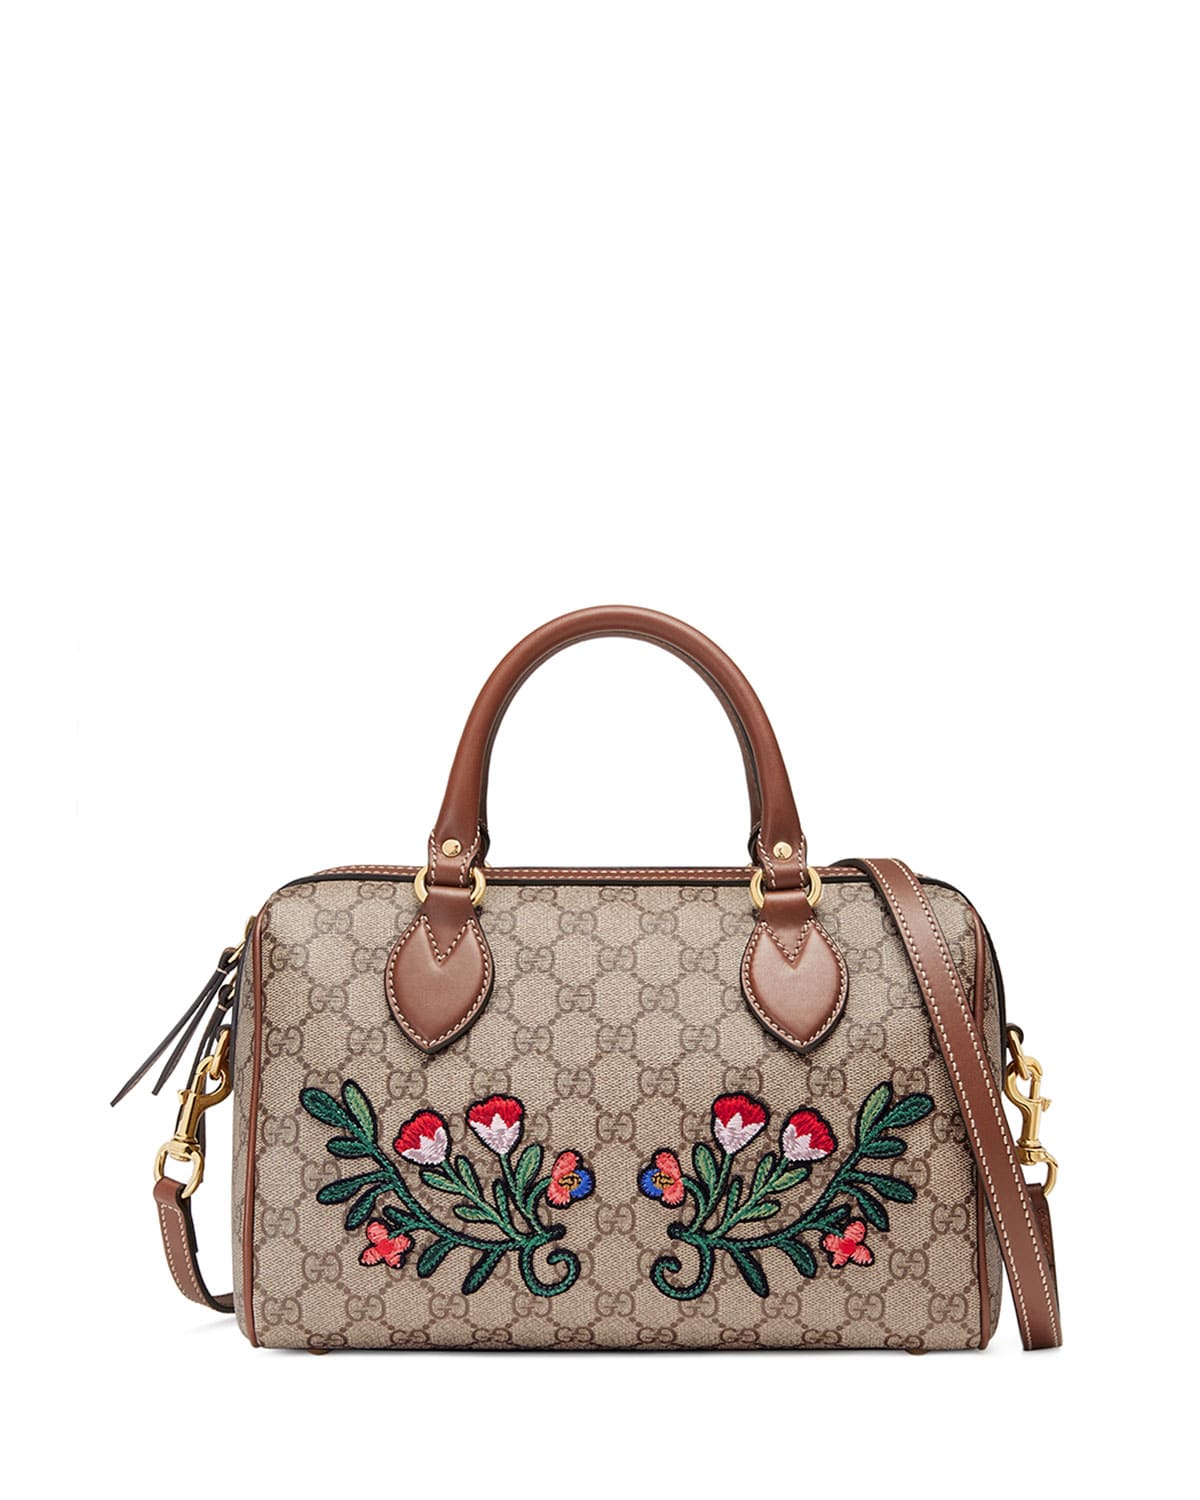 Gucci Resort 2017 Bag Collection | Spotted Fashion